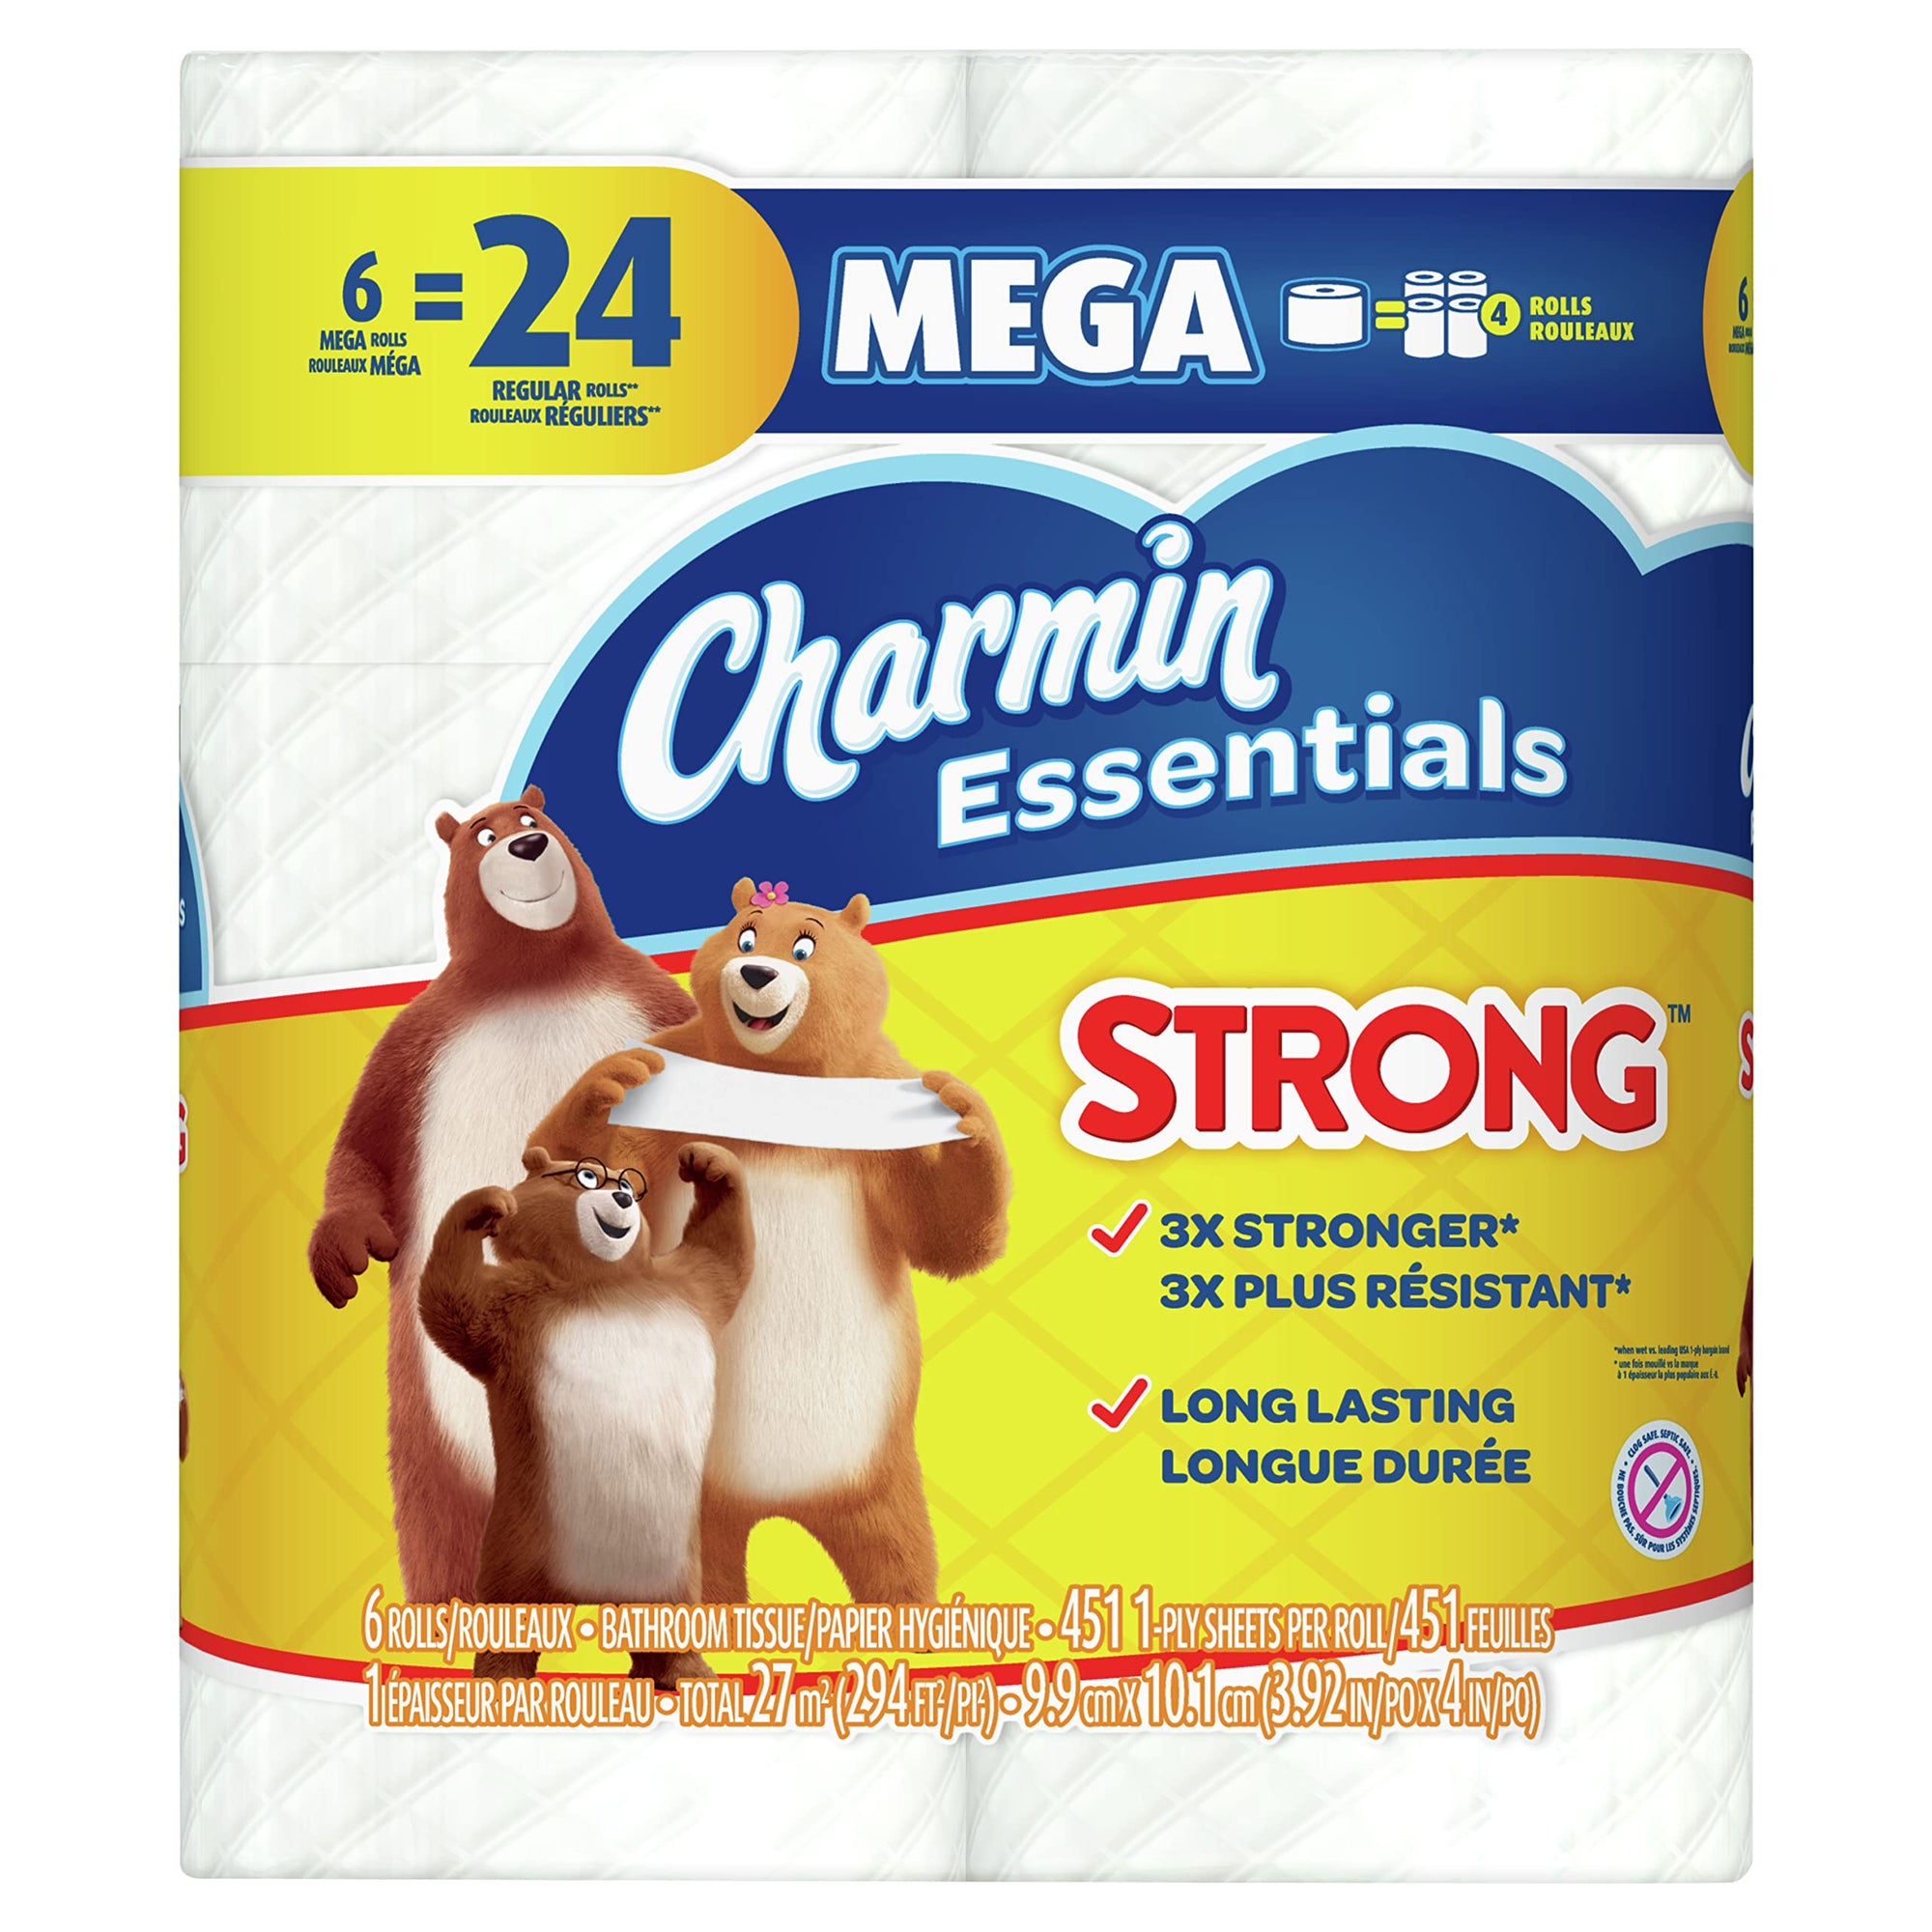 Charmin Essentials Strong 6ct